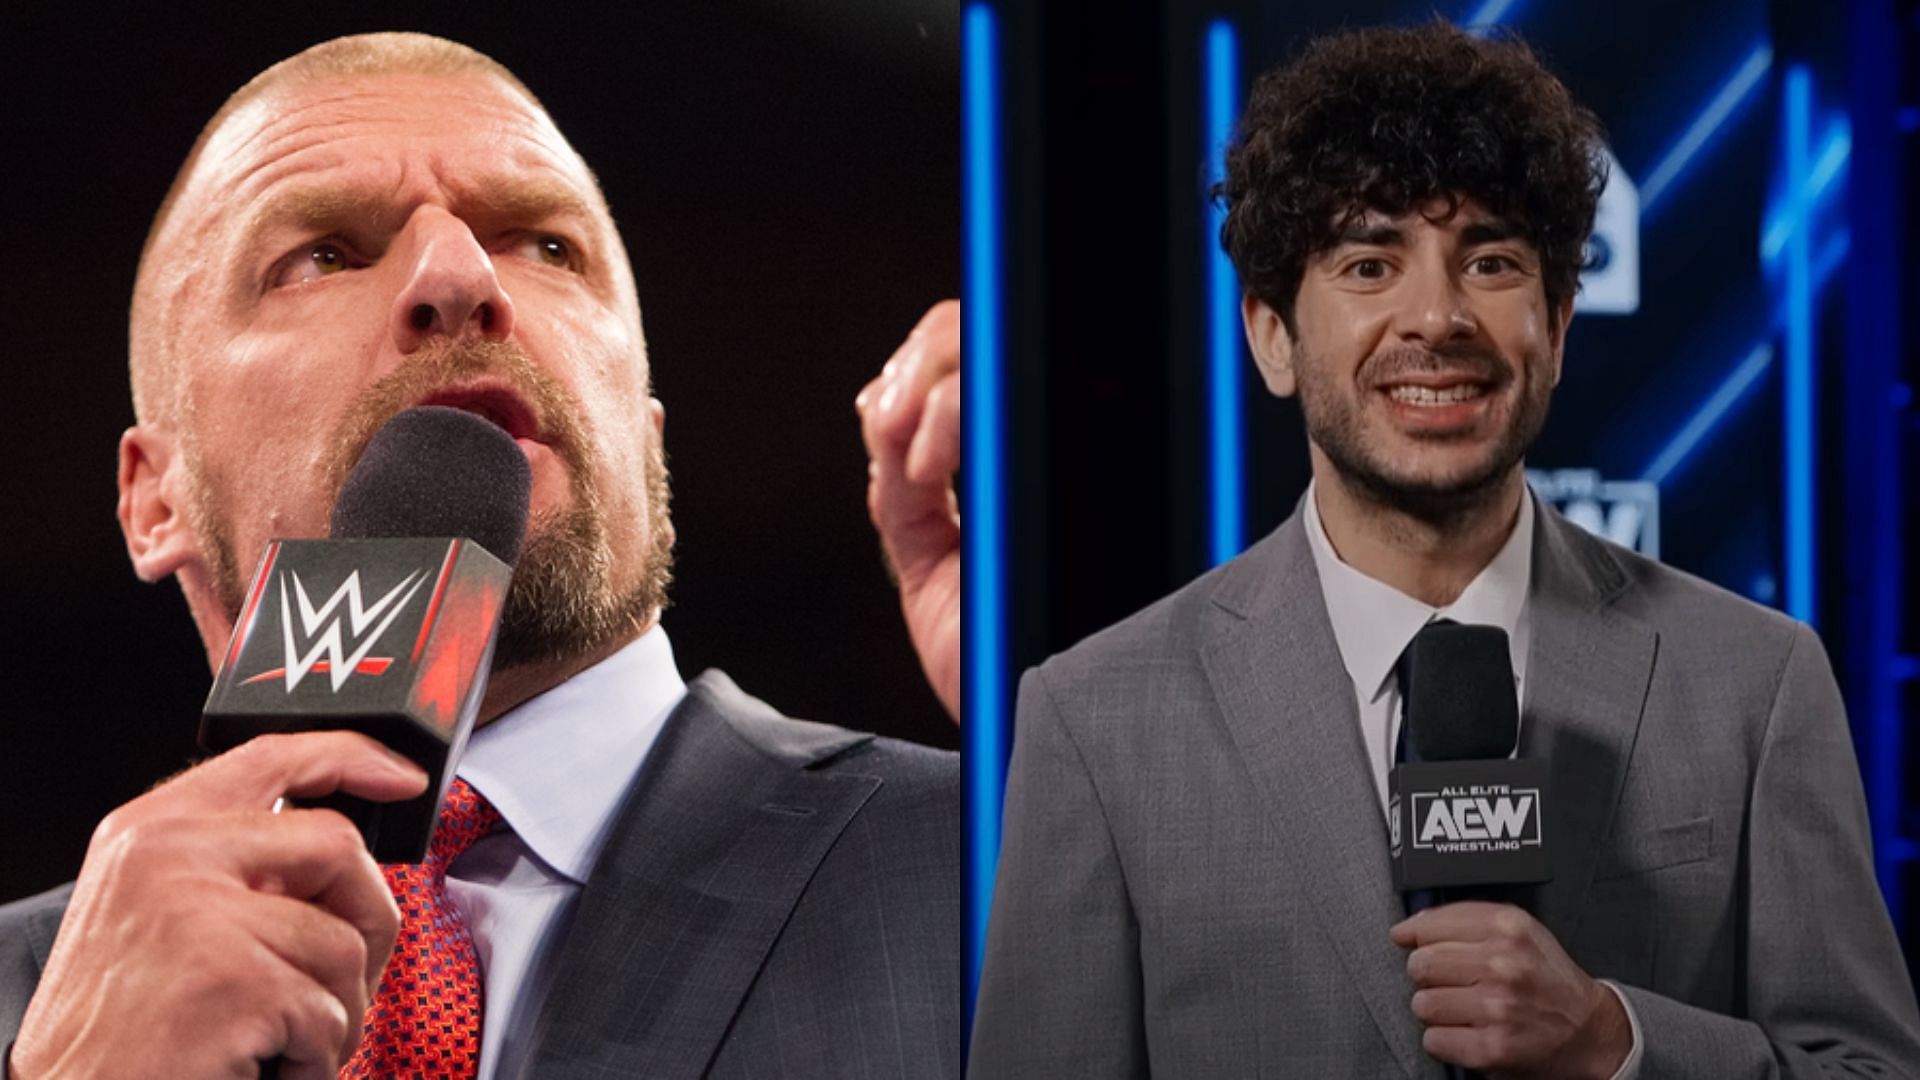 Triple H and Tony Khan are big names in WWE and AEW respectively [Image courtesy of WWE Official Website and AEW YouTube Channel]